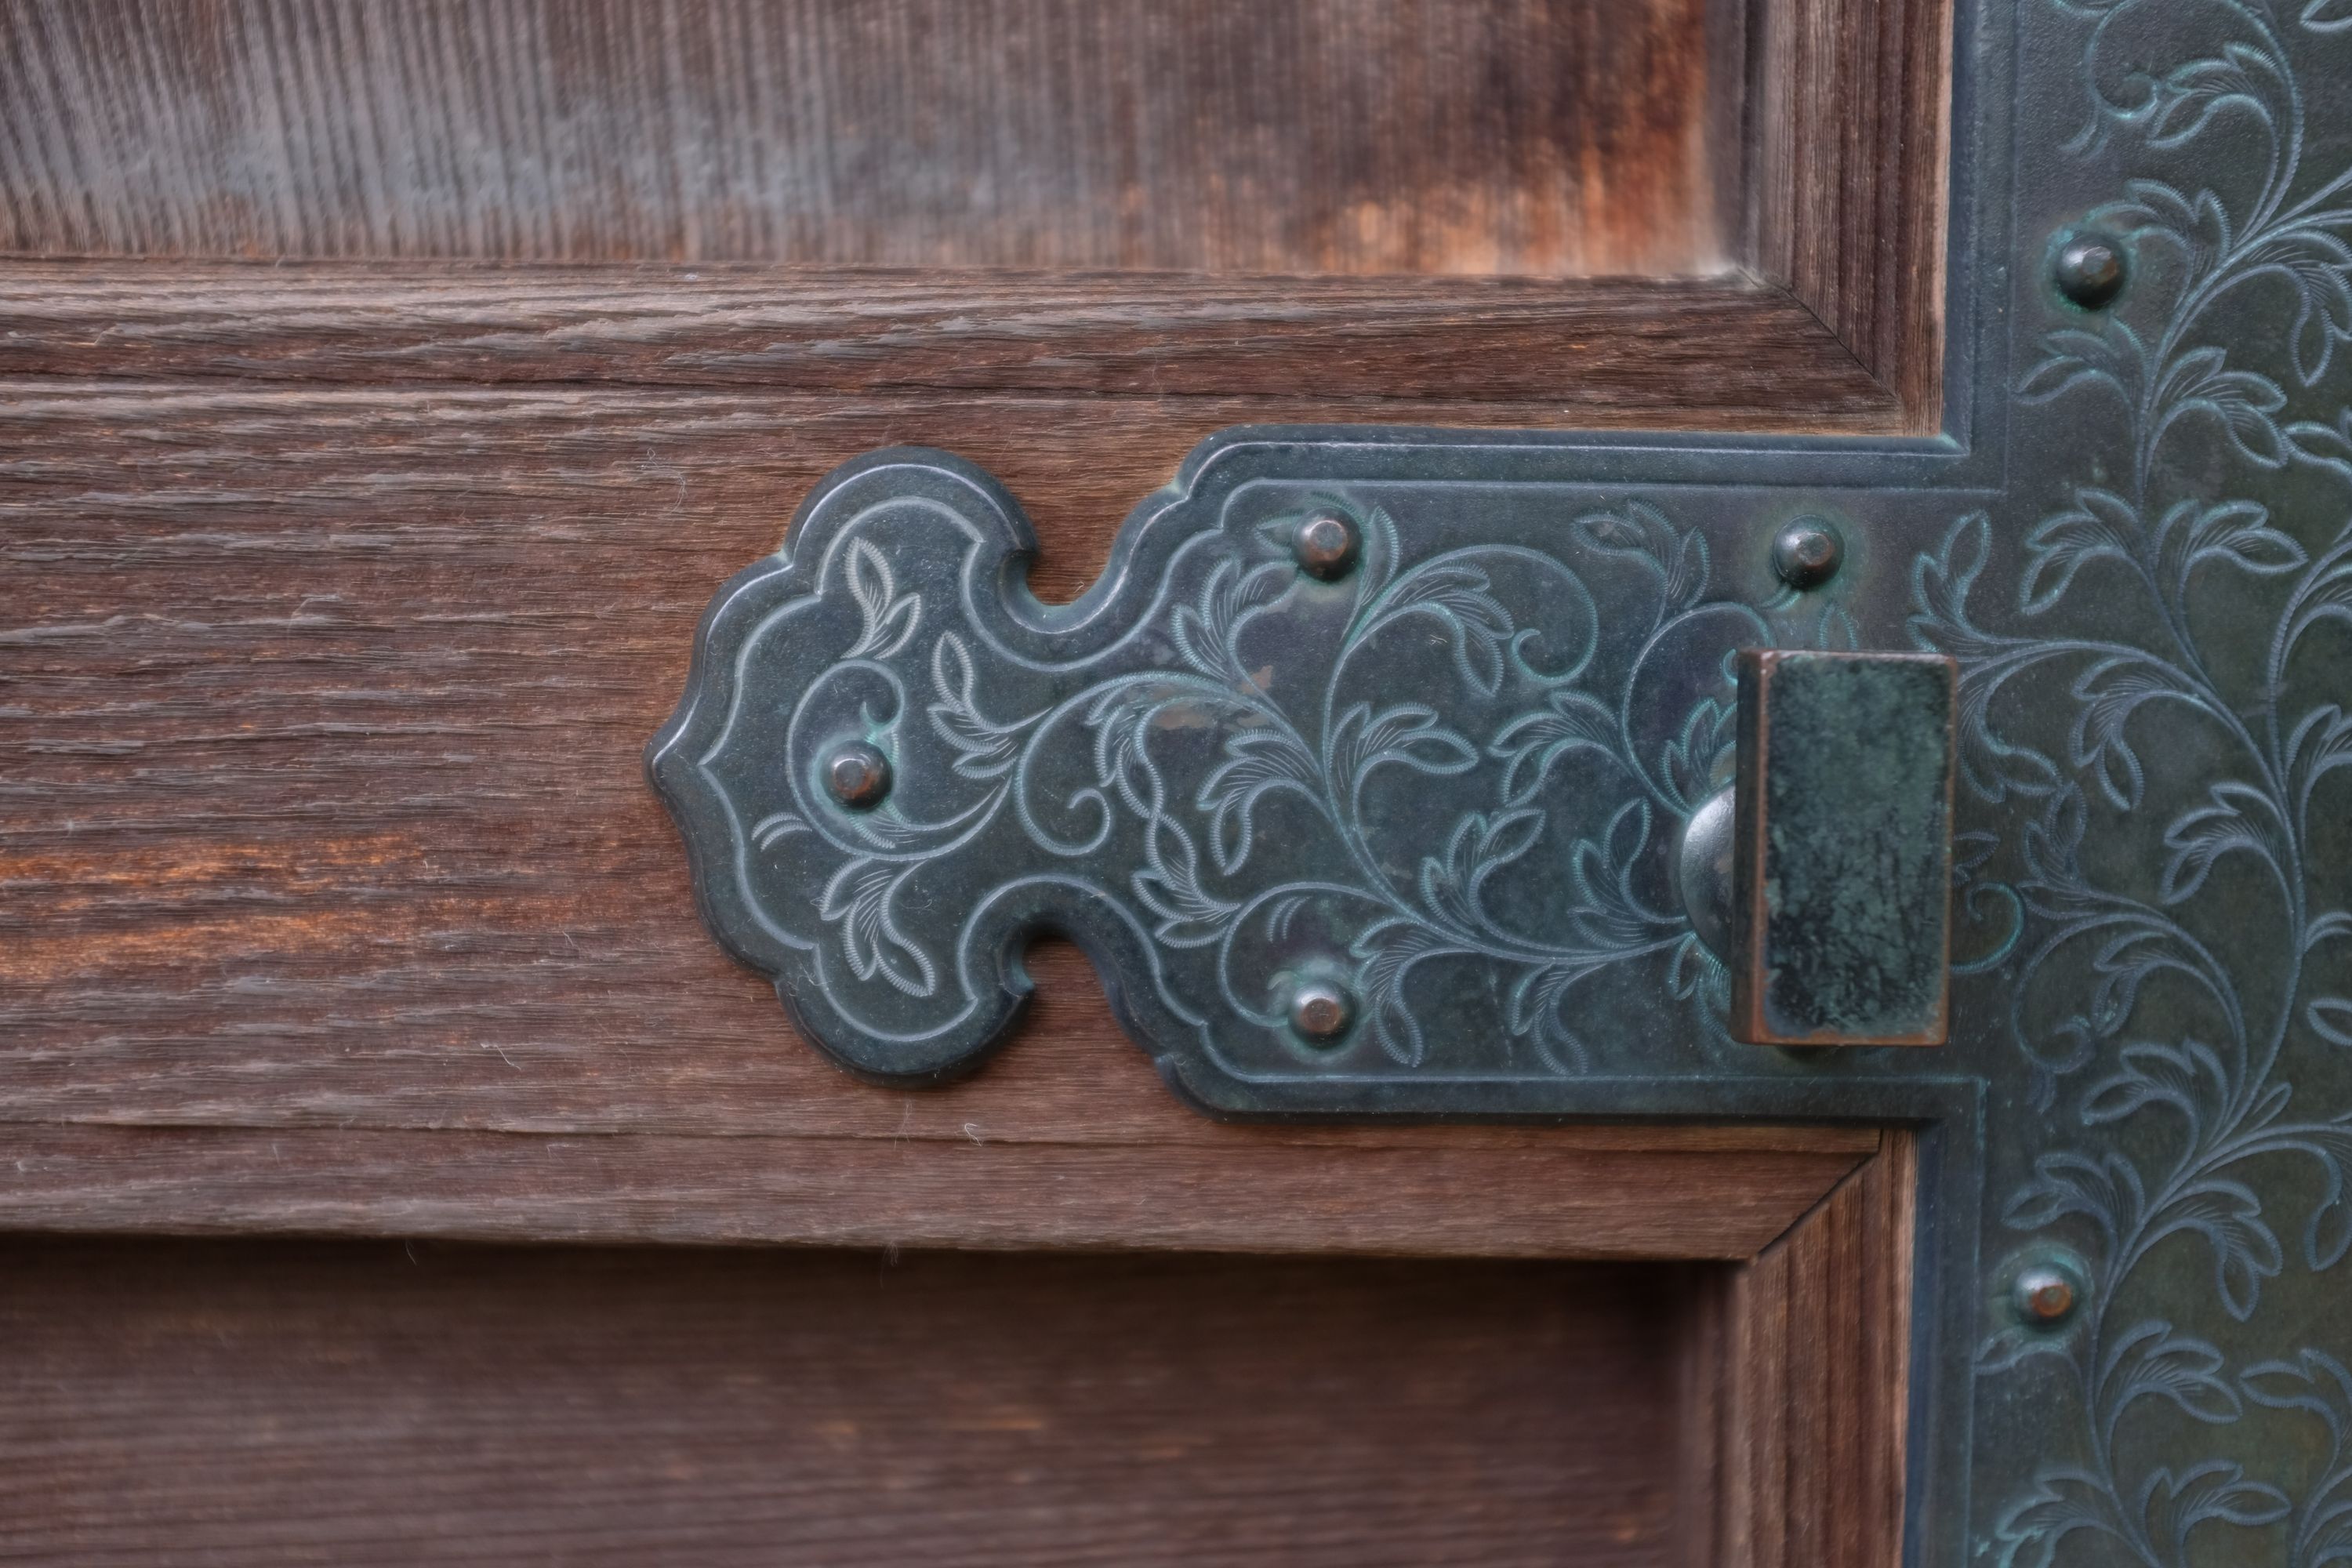 An elaborately carved metal hinge on a wooden door.